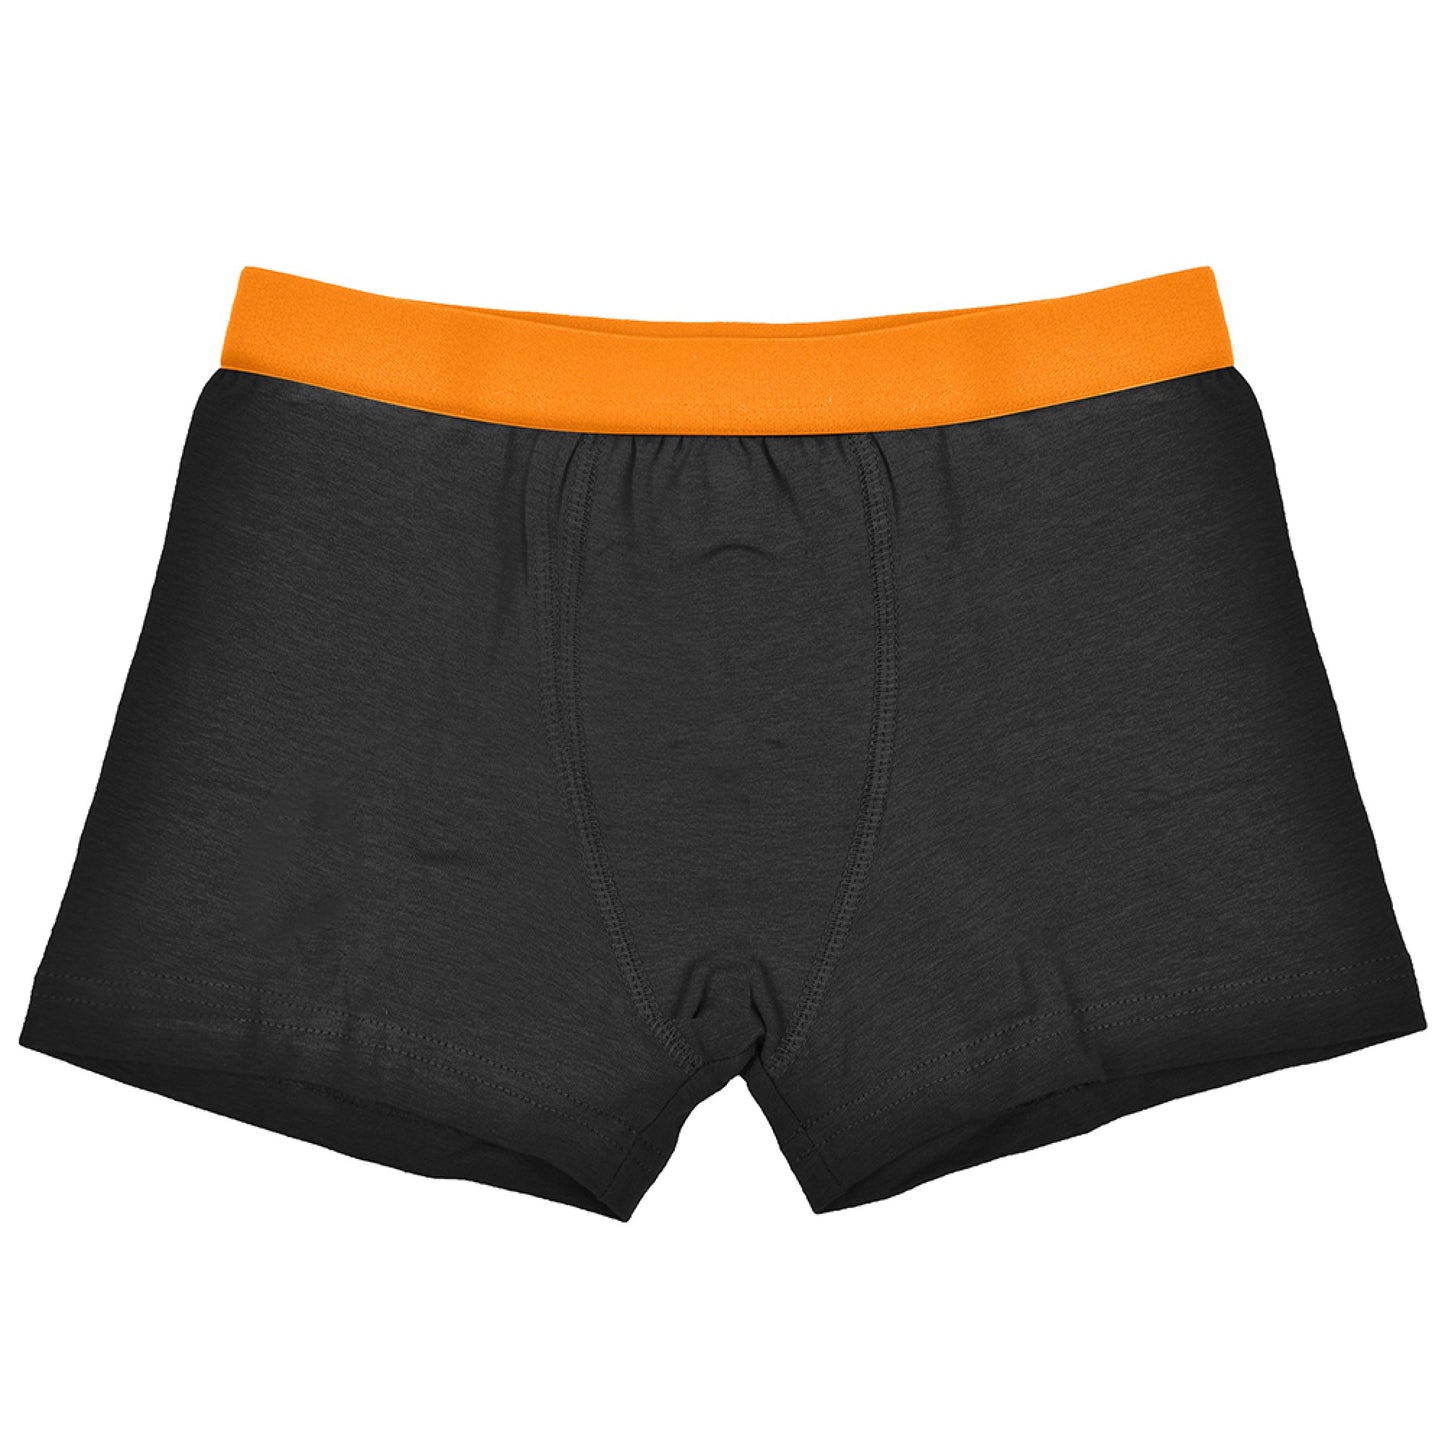 2 Pack Men's Soft Stretch Cotton Blend Jersey Trunks Underwear Underpants - Black with Coloured Waistbands